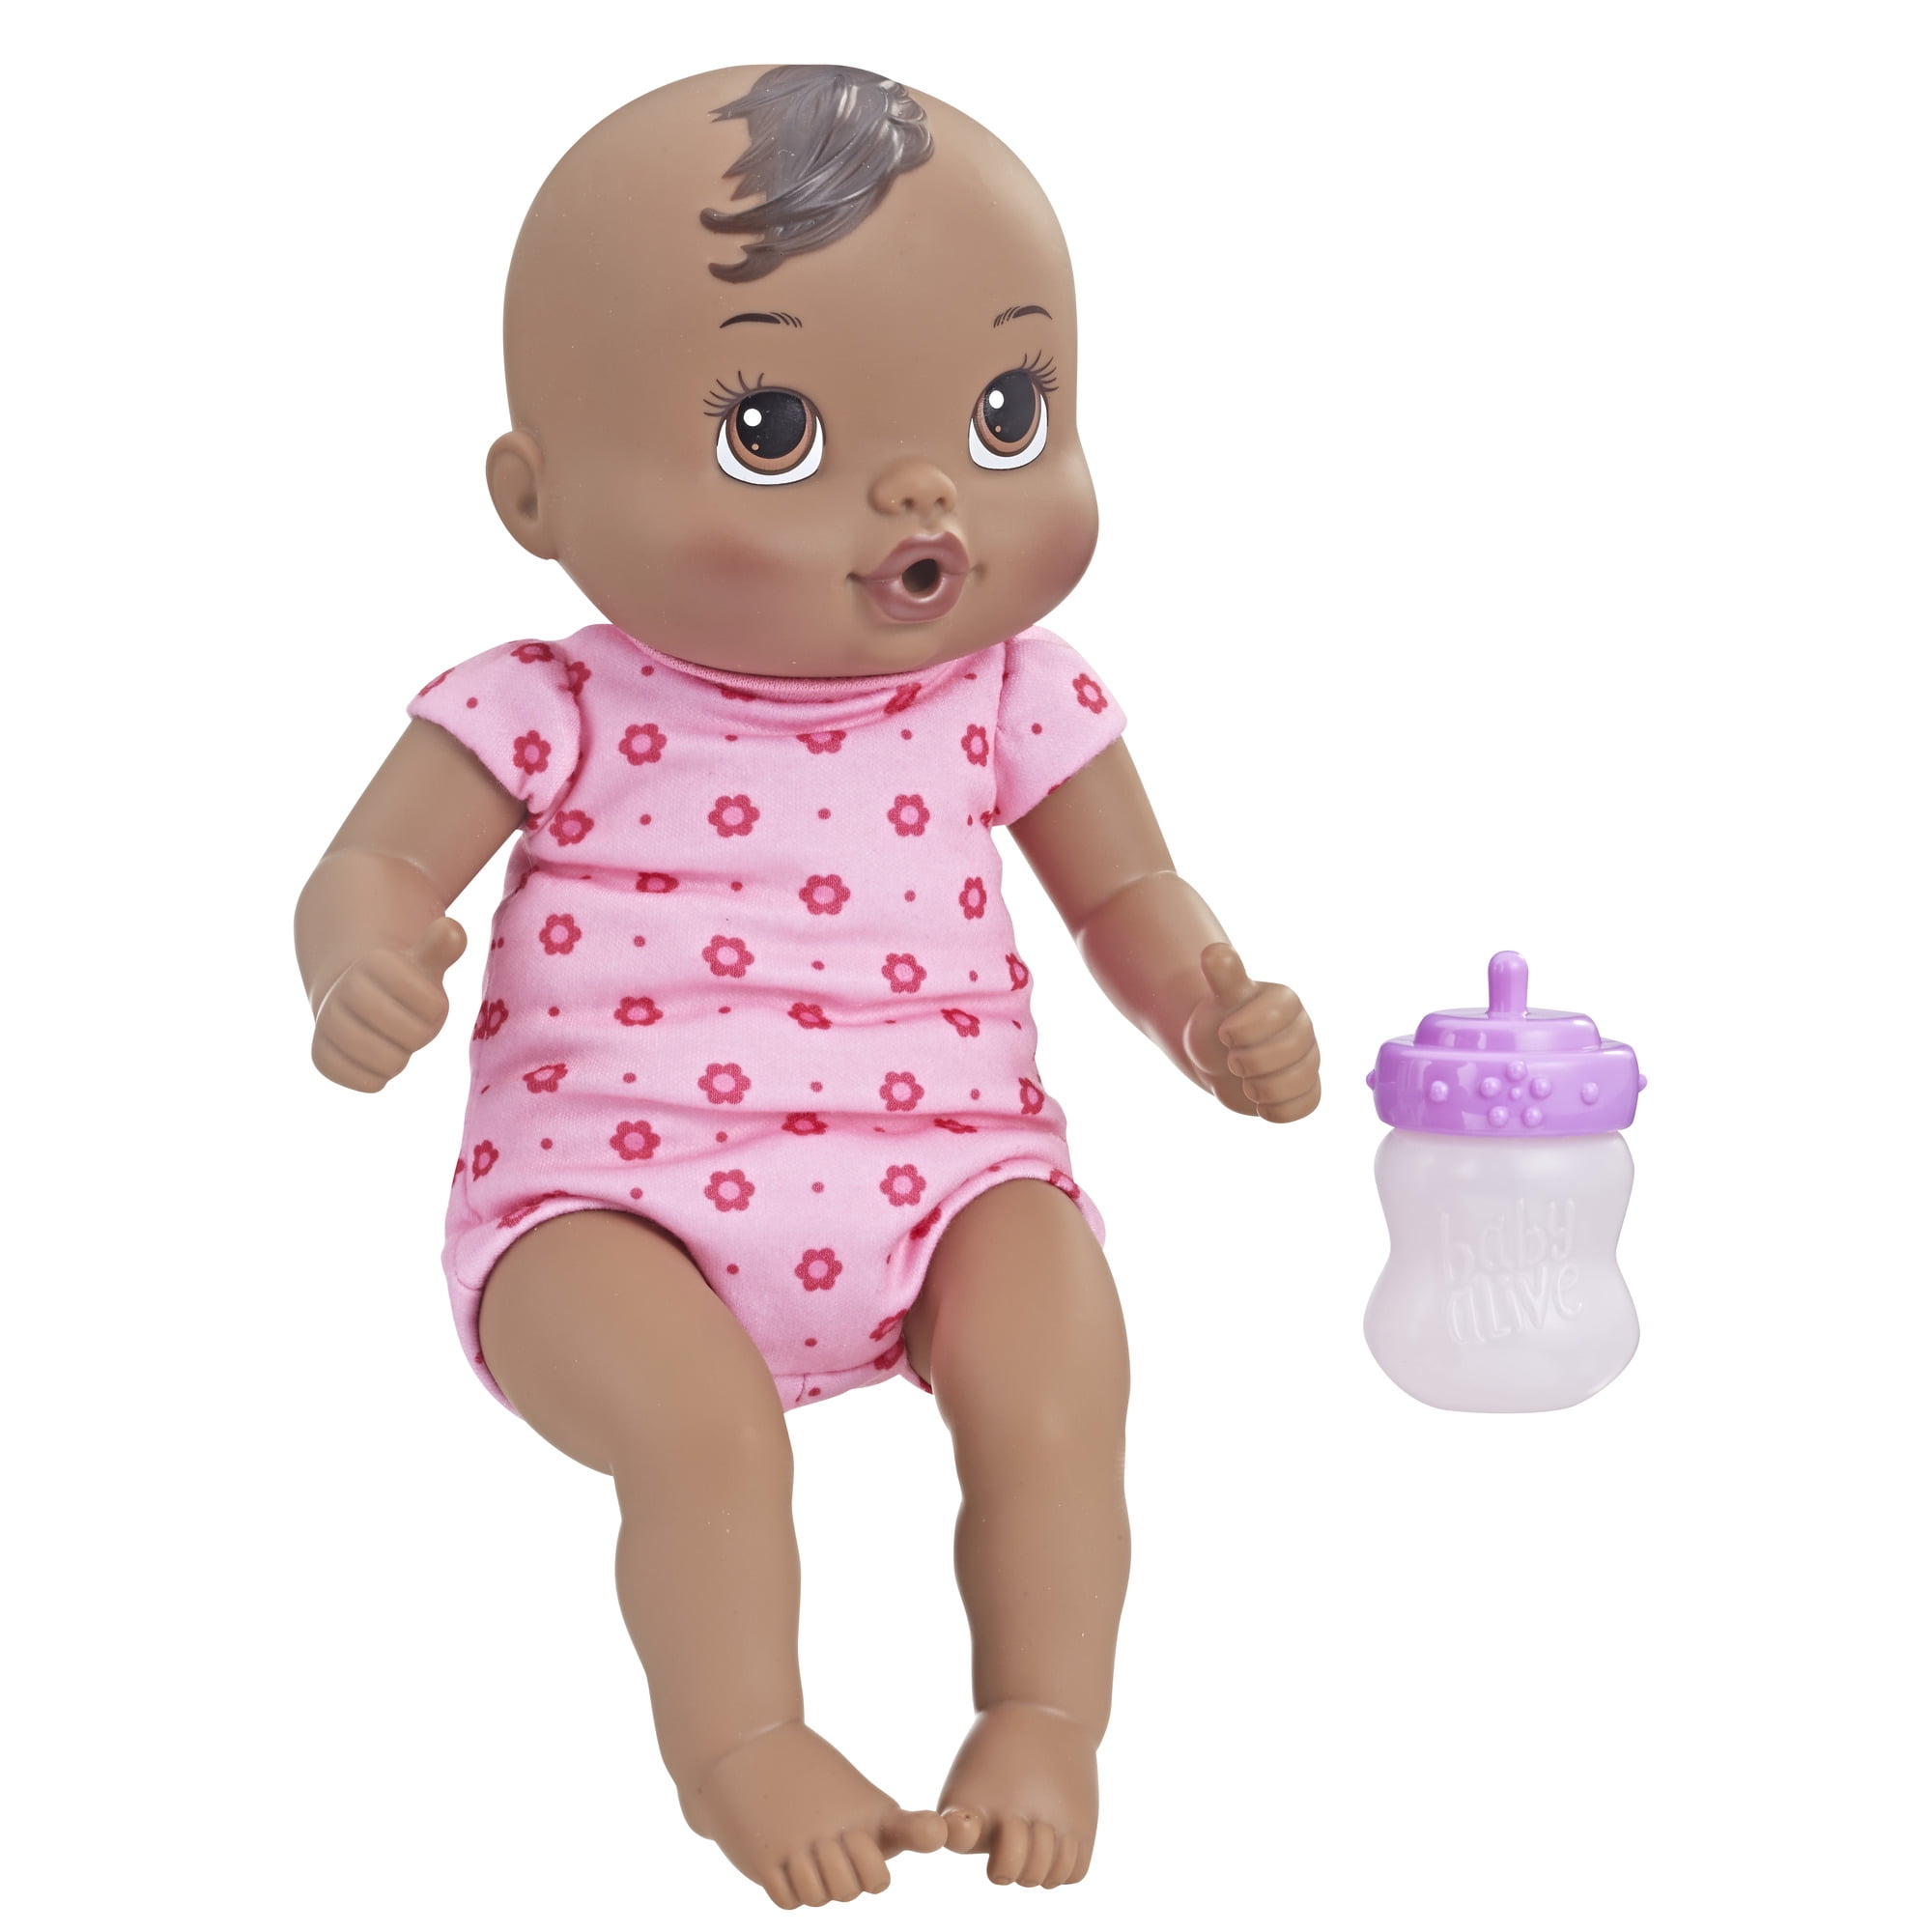 baby alive doll 2000